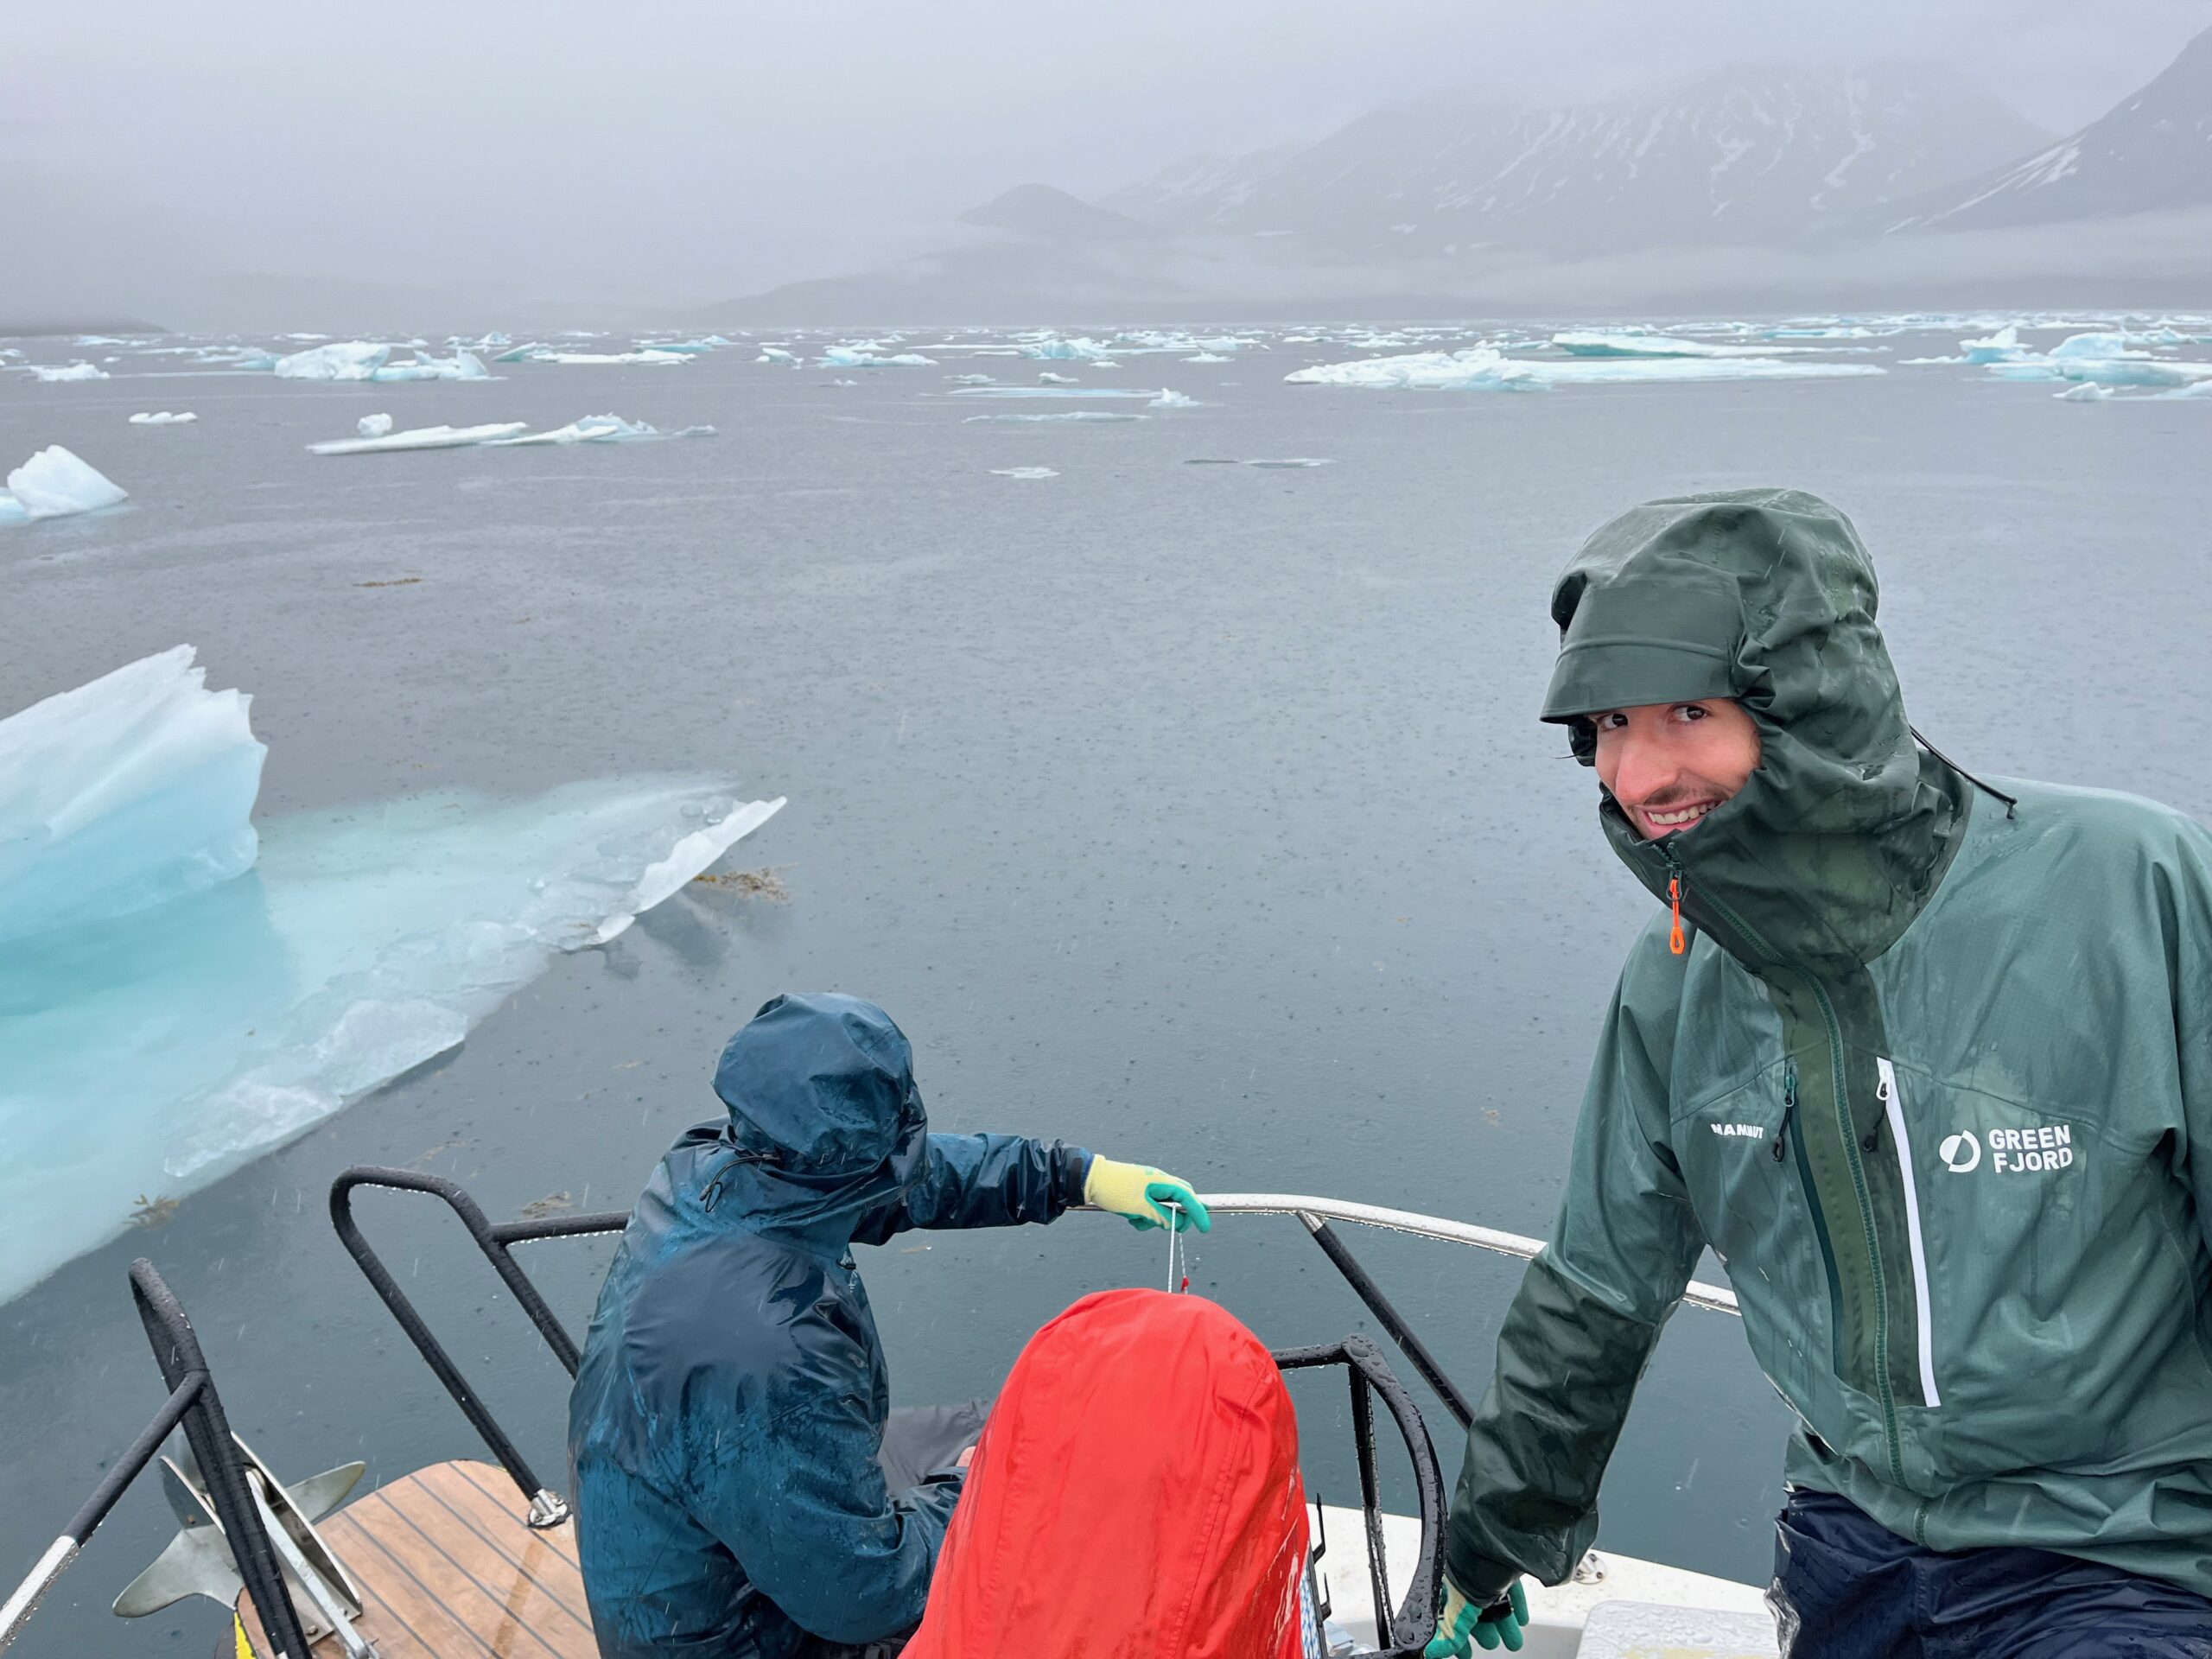 First impressions from the 2023 GreenFjord field season